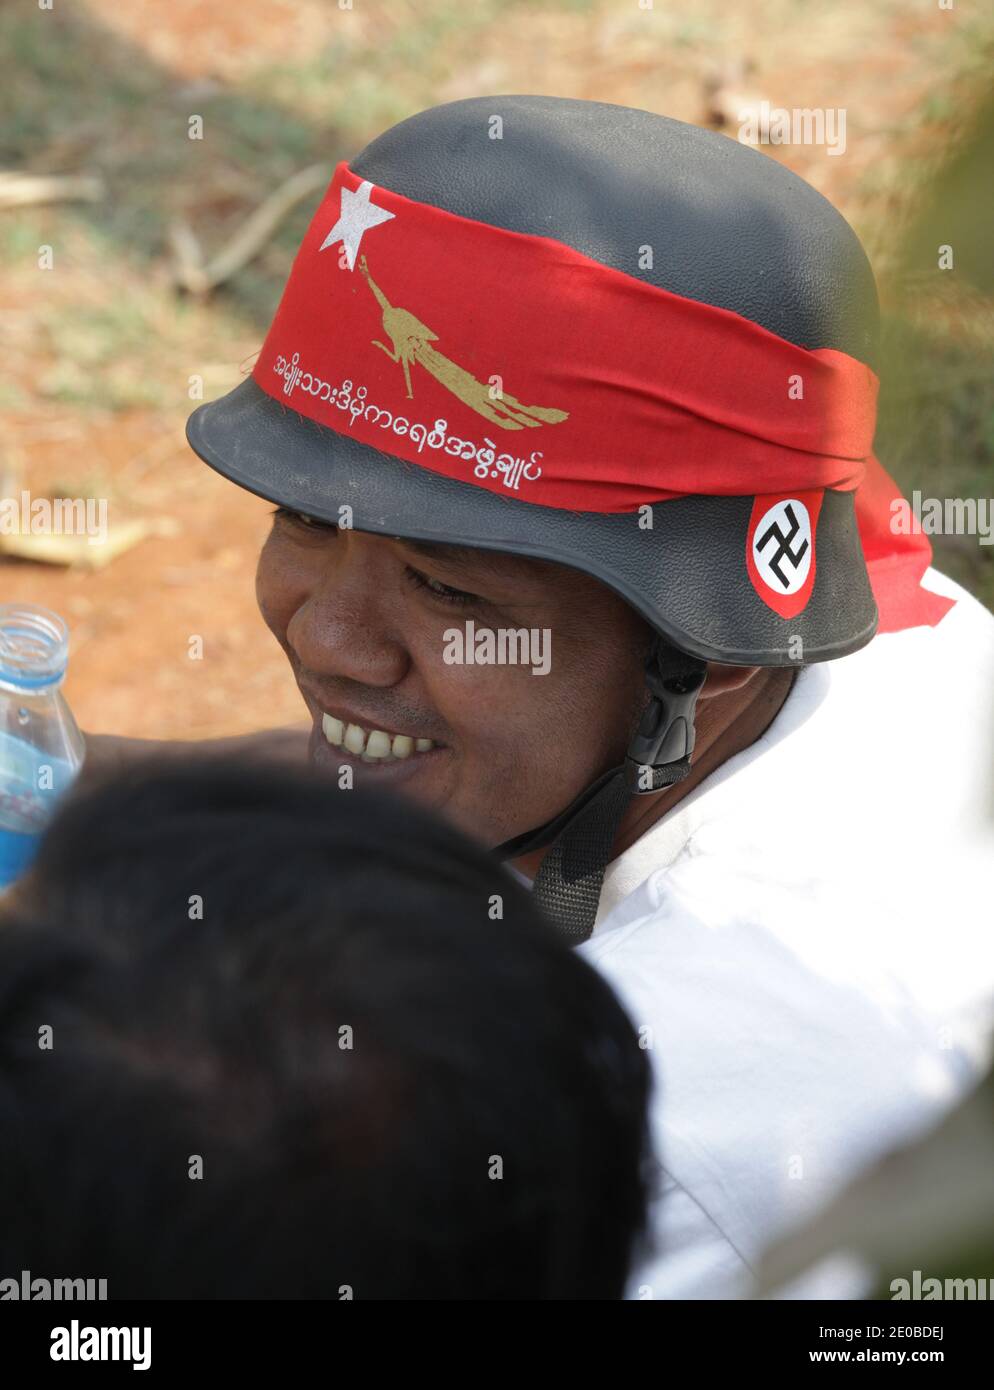 A man wearing a German army helmet with a nazi swastika together with a National League for Democracy red flag is seen among thousands of supporters who gathered for a campaign meeting of Nobel Peace Prize winner and National League for Democracy (NLD) chairman Aung San Suu Ky, in Lashio, northern Shan State, Myanmar on March 17, 2012. Photo by Christophe Loviny/ABACAPRESS.COM Stock Photo